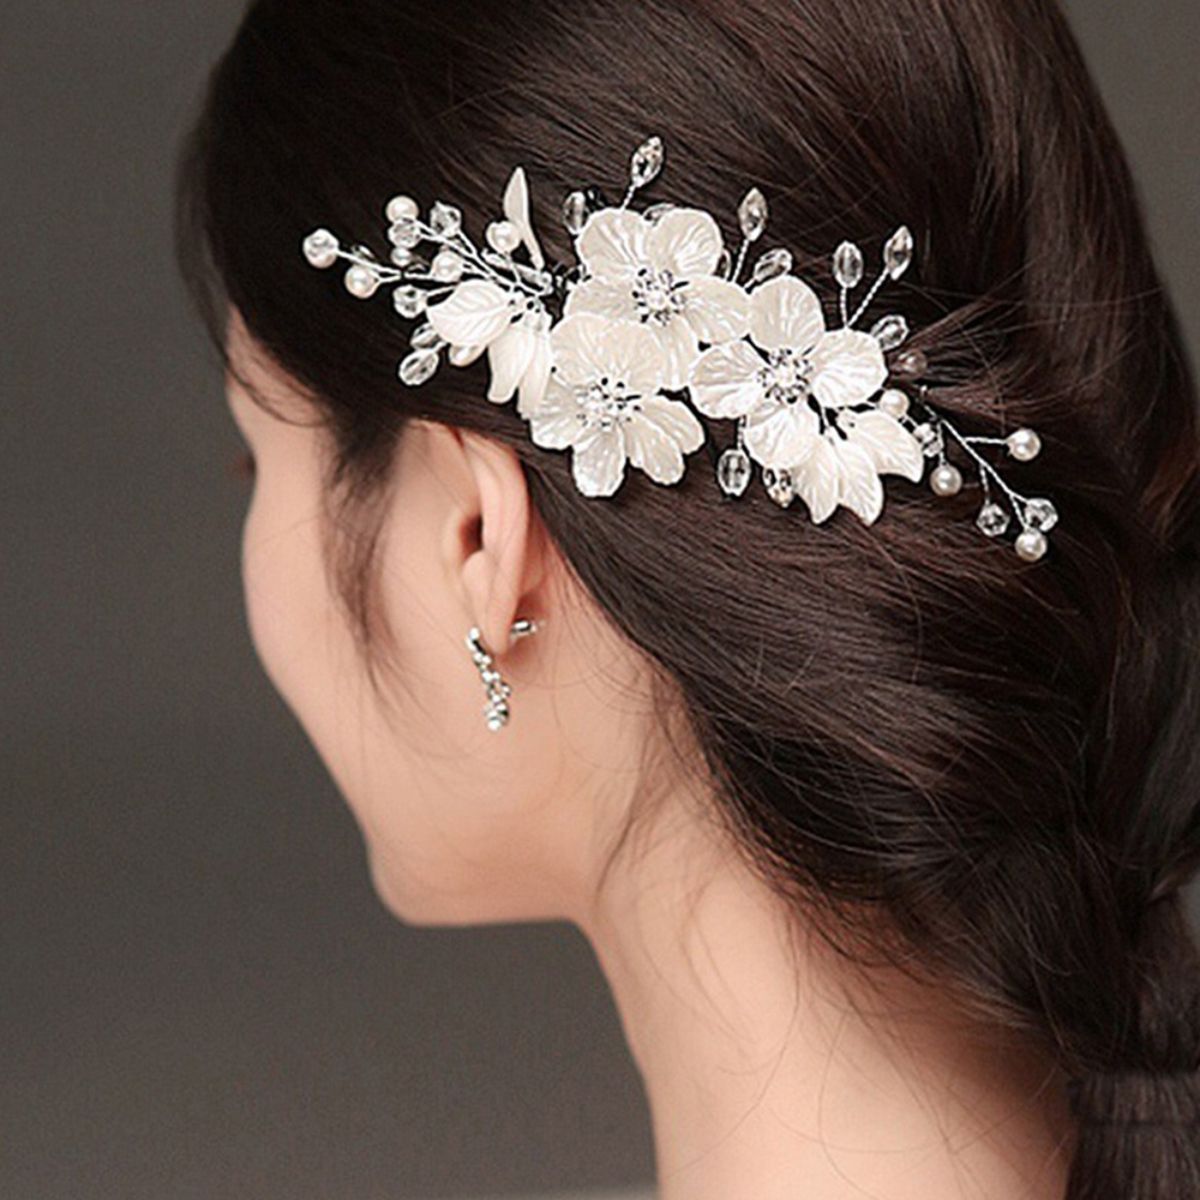 Buy Belicia Headpiece Crystal Bridal Hair Pins Clips Wedding Hair  Accessories Hair Set Jewelry With Rhinestone For Brides and Bridesmaids Set  Of 12 Online at Low Prices in India  Amazonin